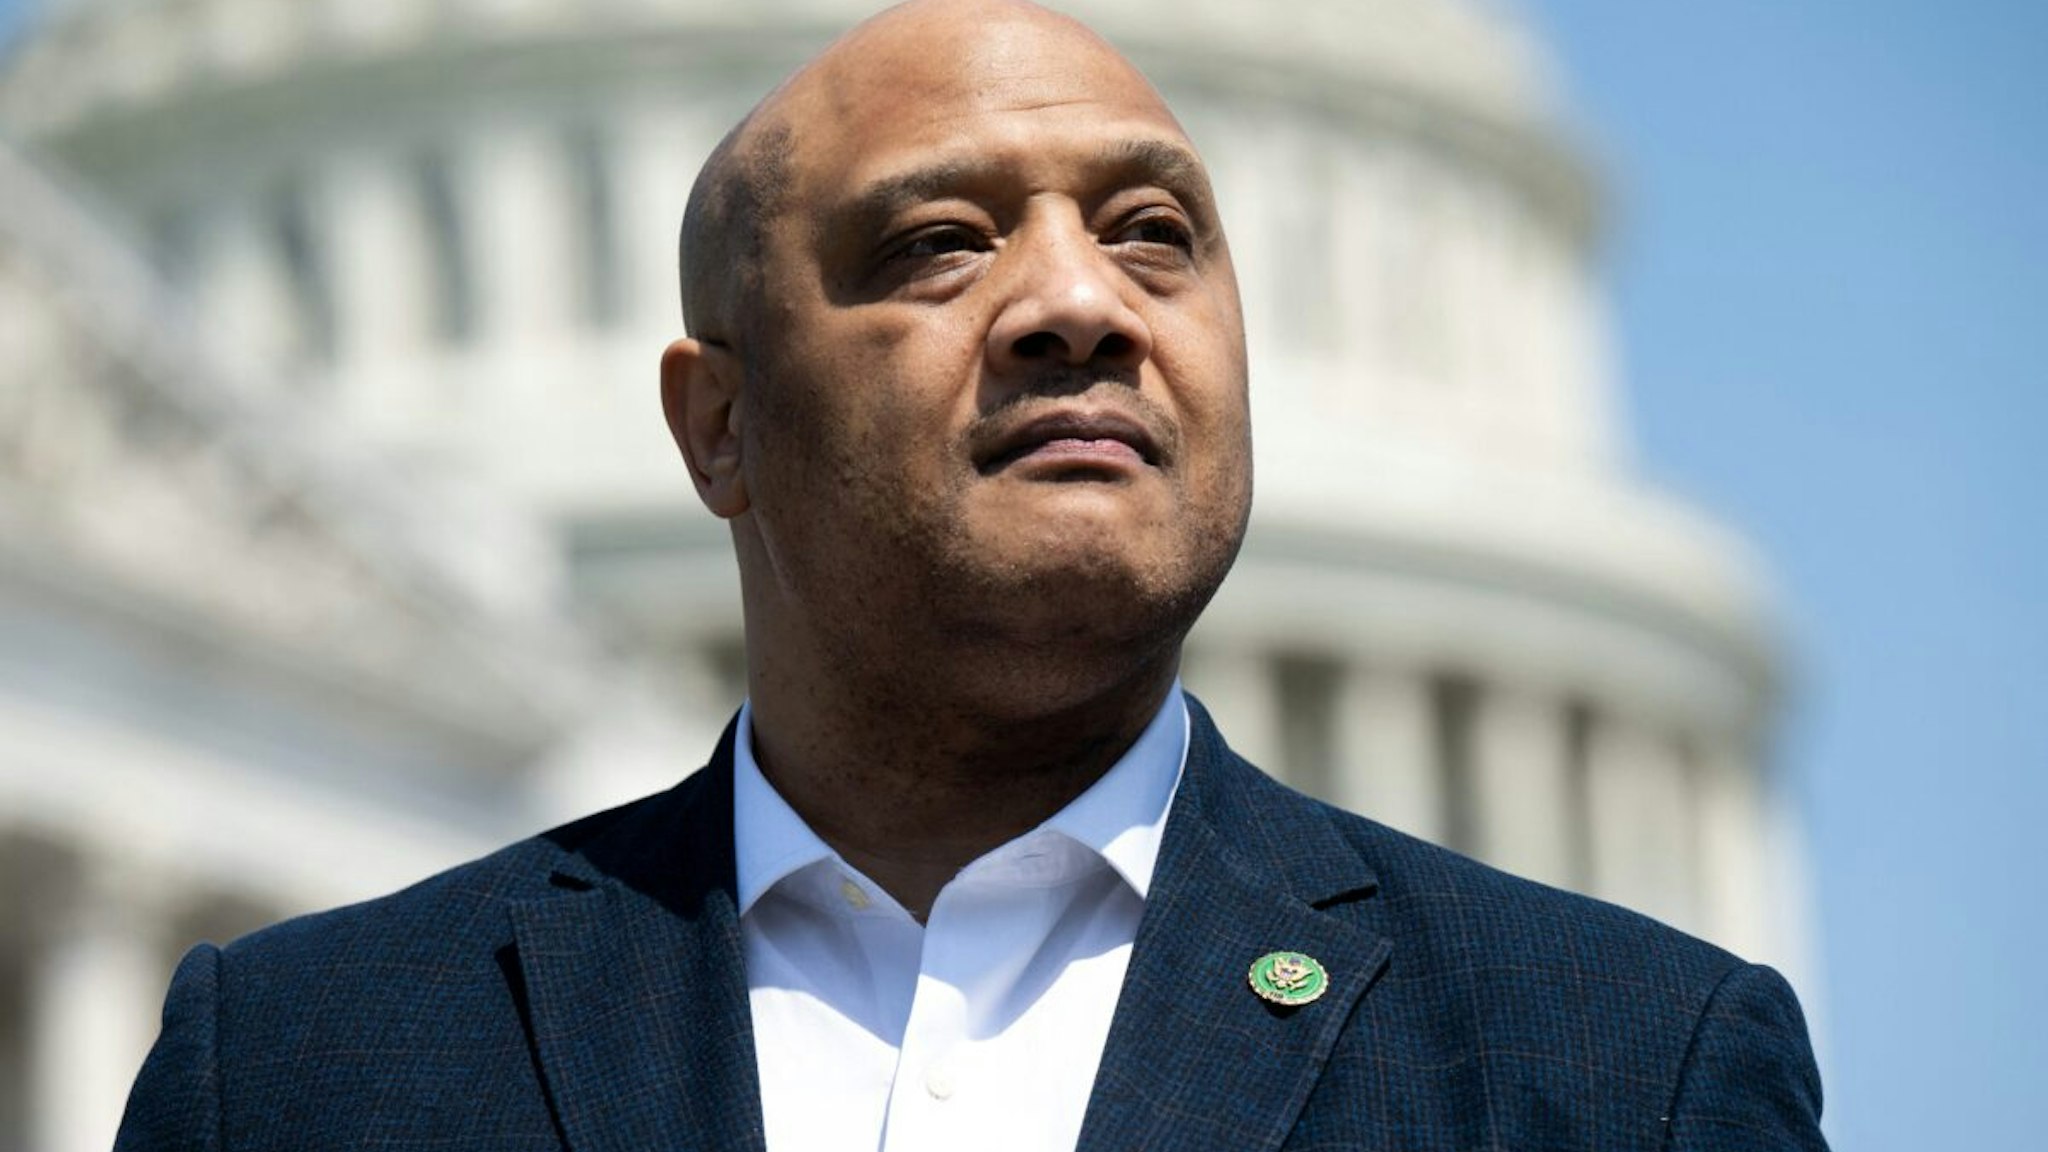 US Representative Andre Carson, Democrat of Indiana, speaks during a press conference with family members of Palestinian-American journalist Shireen Abu Akleh, as members of Congress call for US investigations into Israel's actions and reintroduce the Justice for Shireen Act, outside the US Capitol in Washington, DC, May 18, 2023.